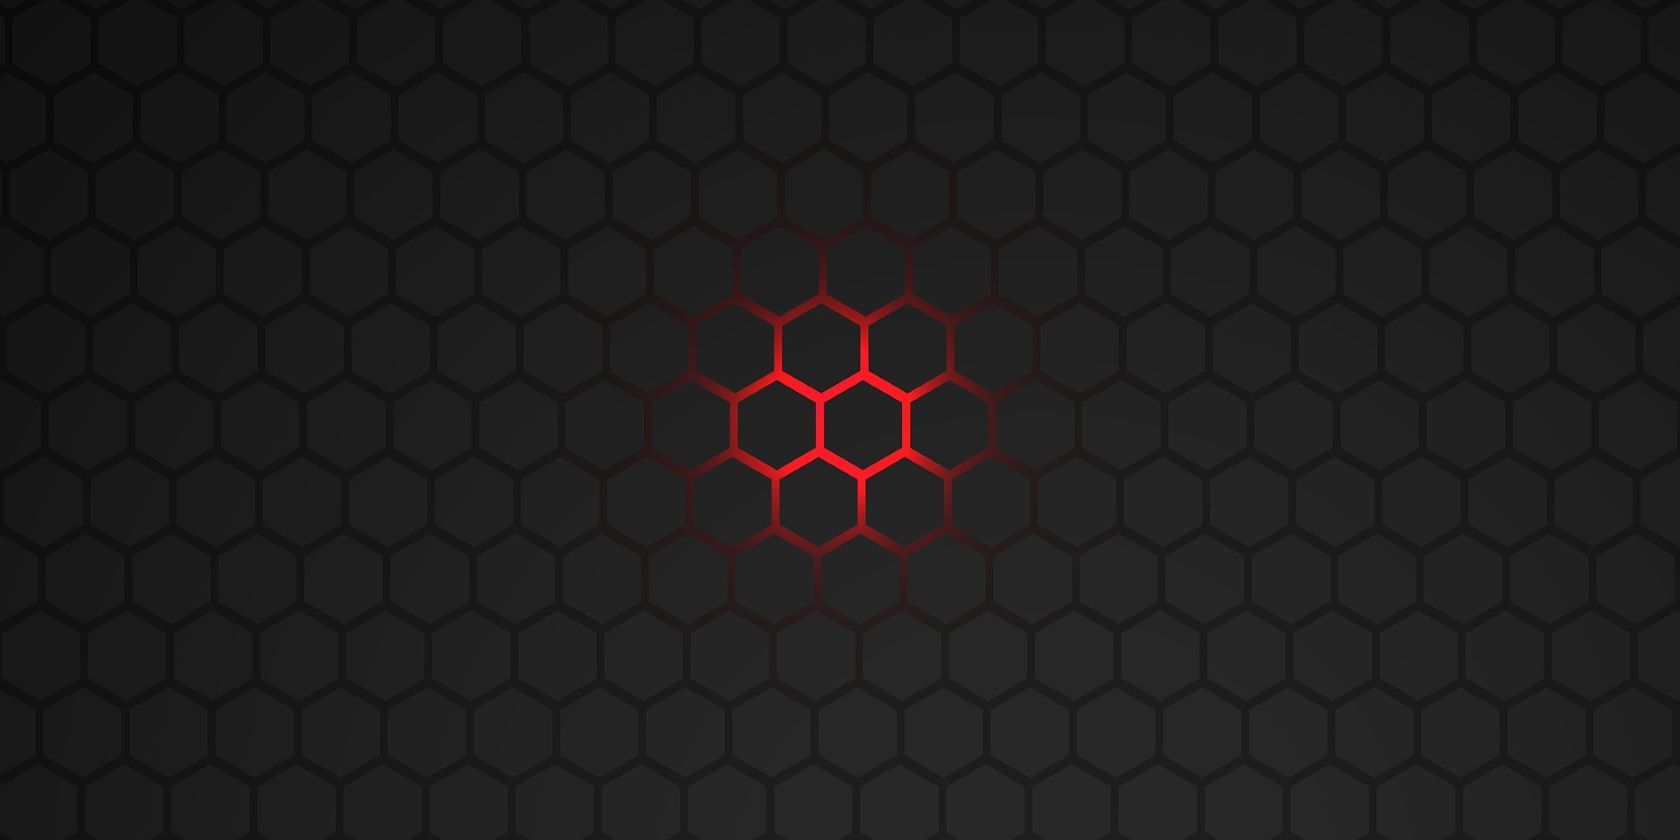 A black and red honeycomb.